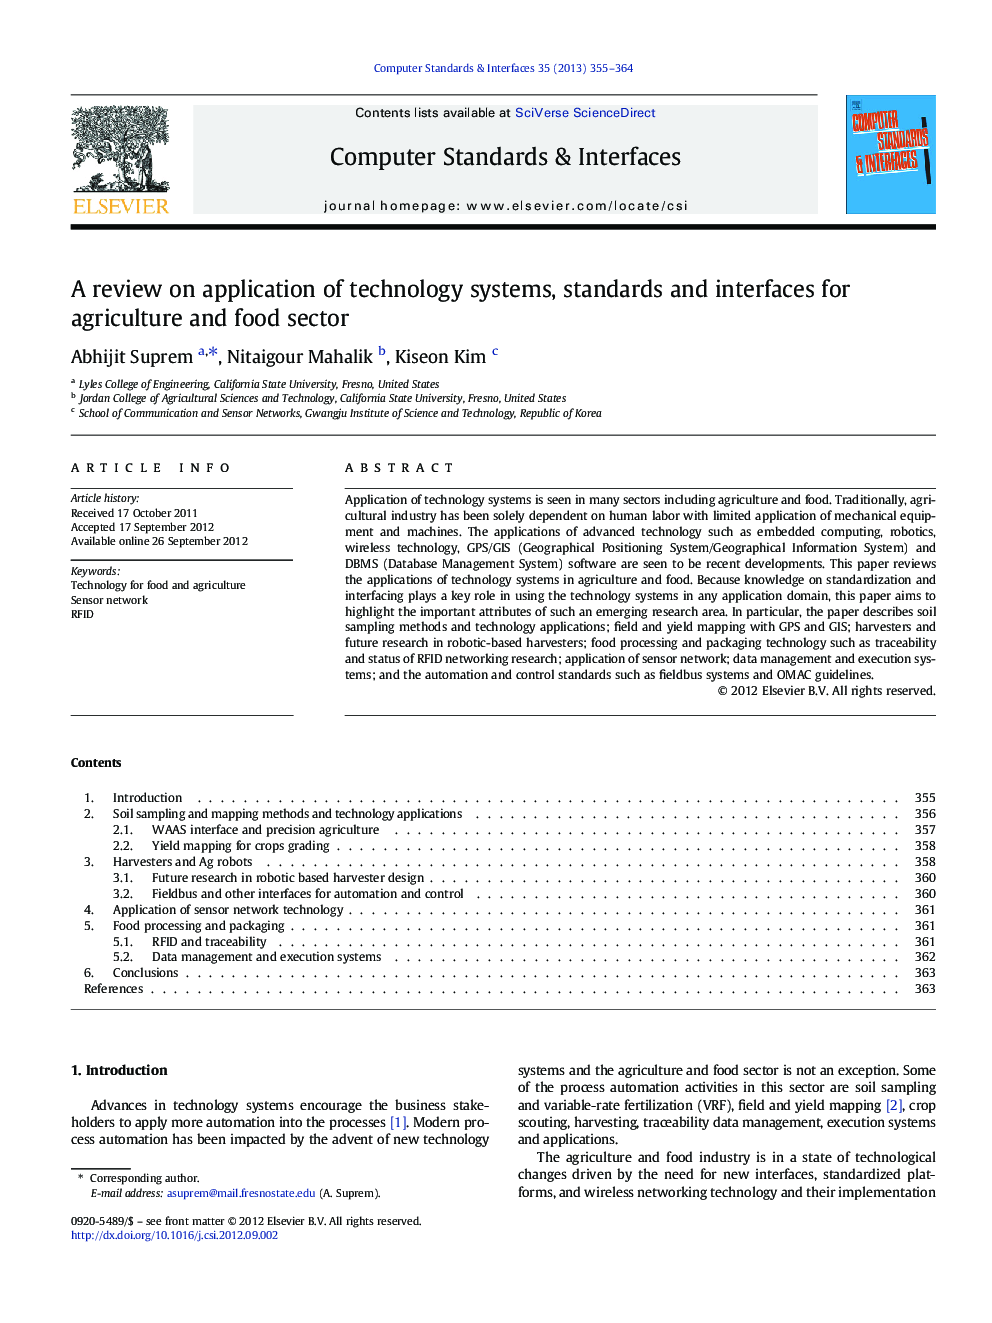 A review on application of technology systems, standards and interfaces for agriculture and food sector